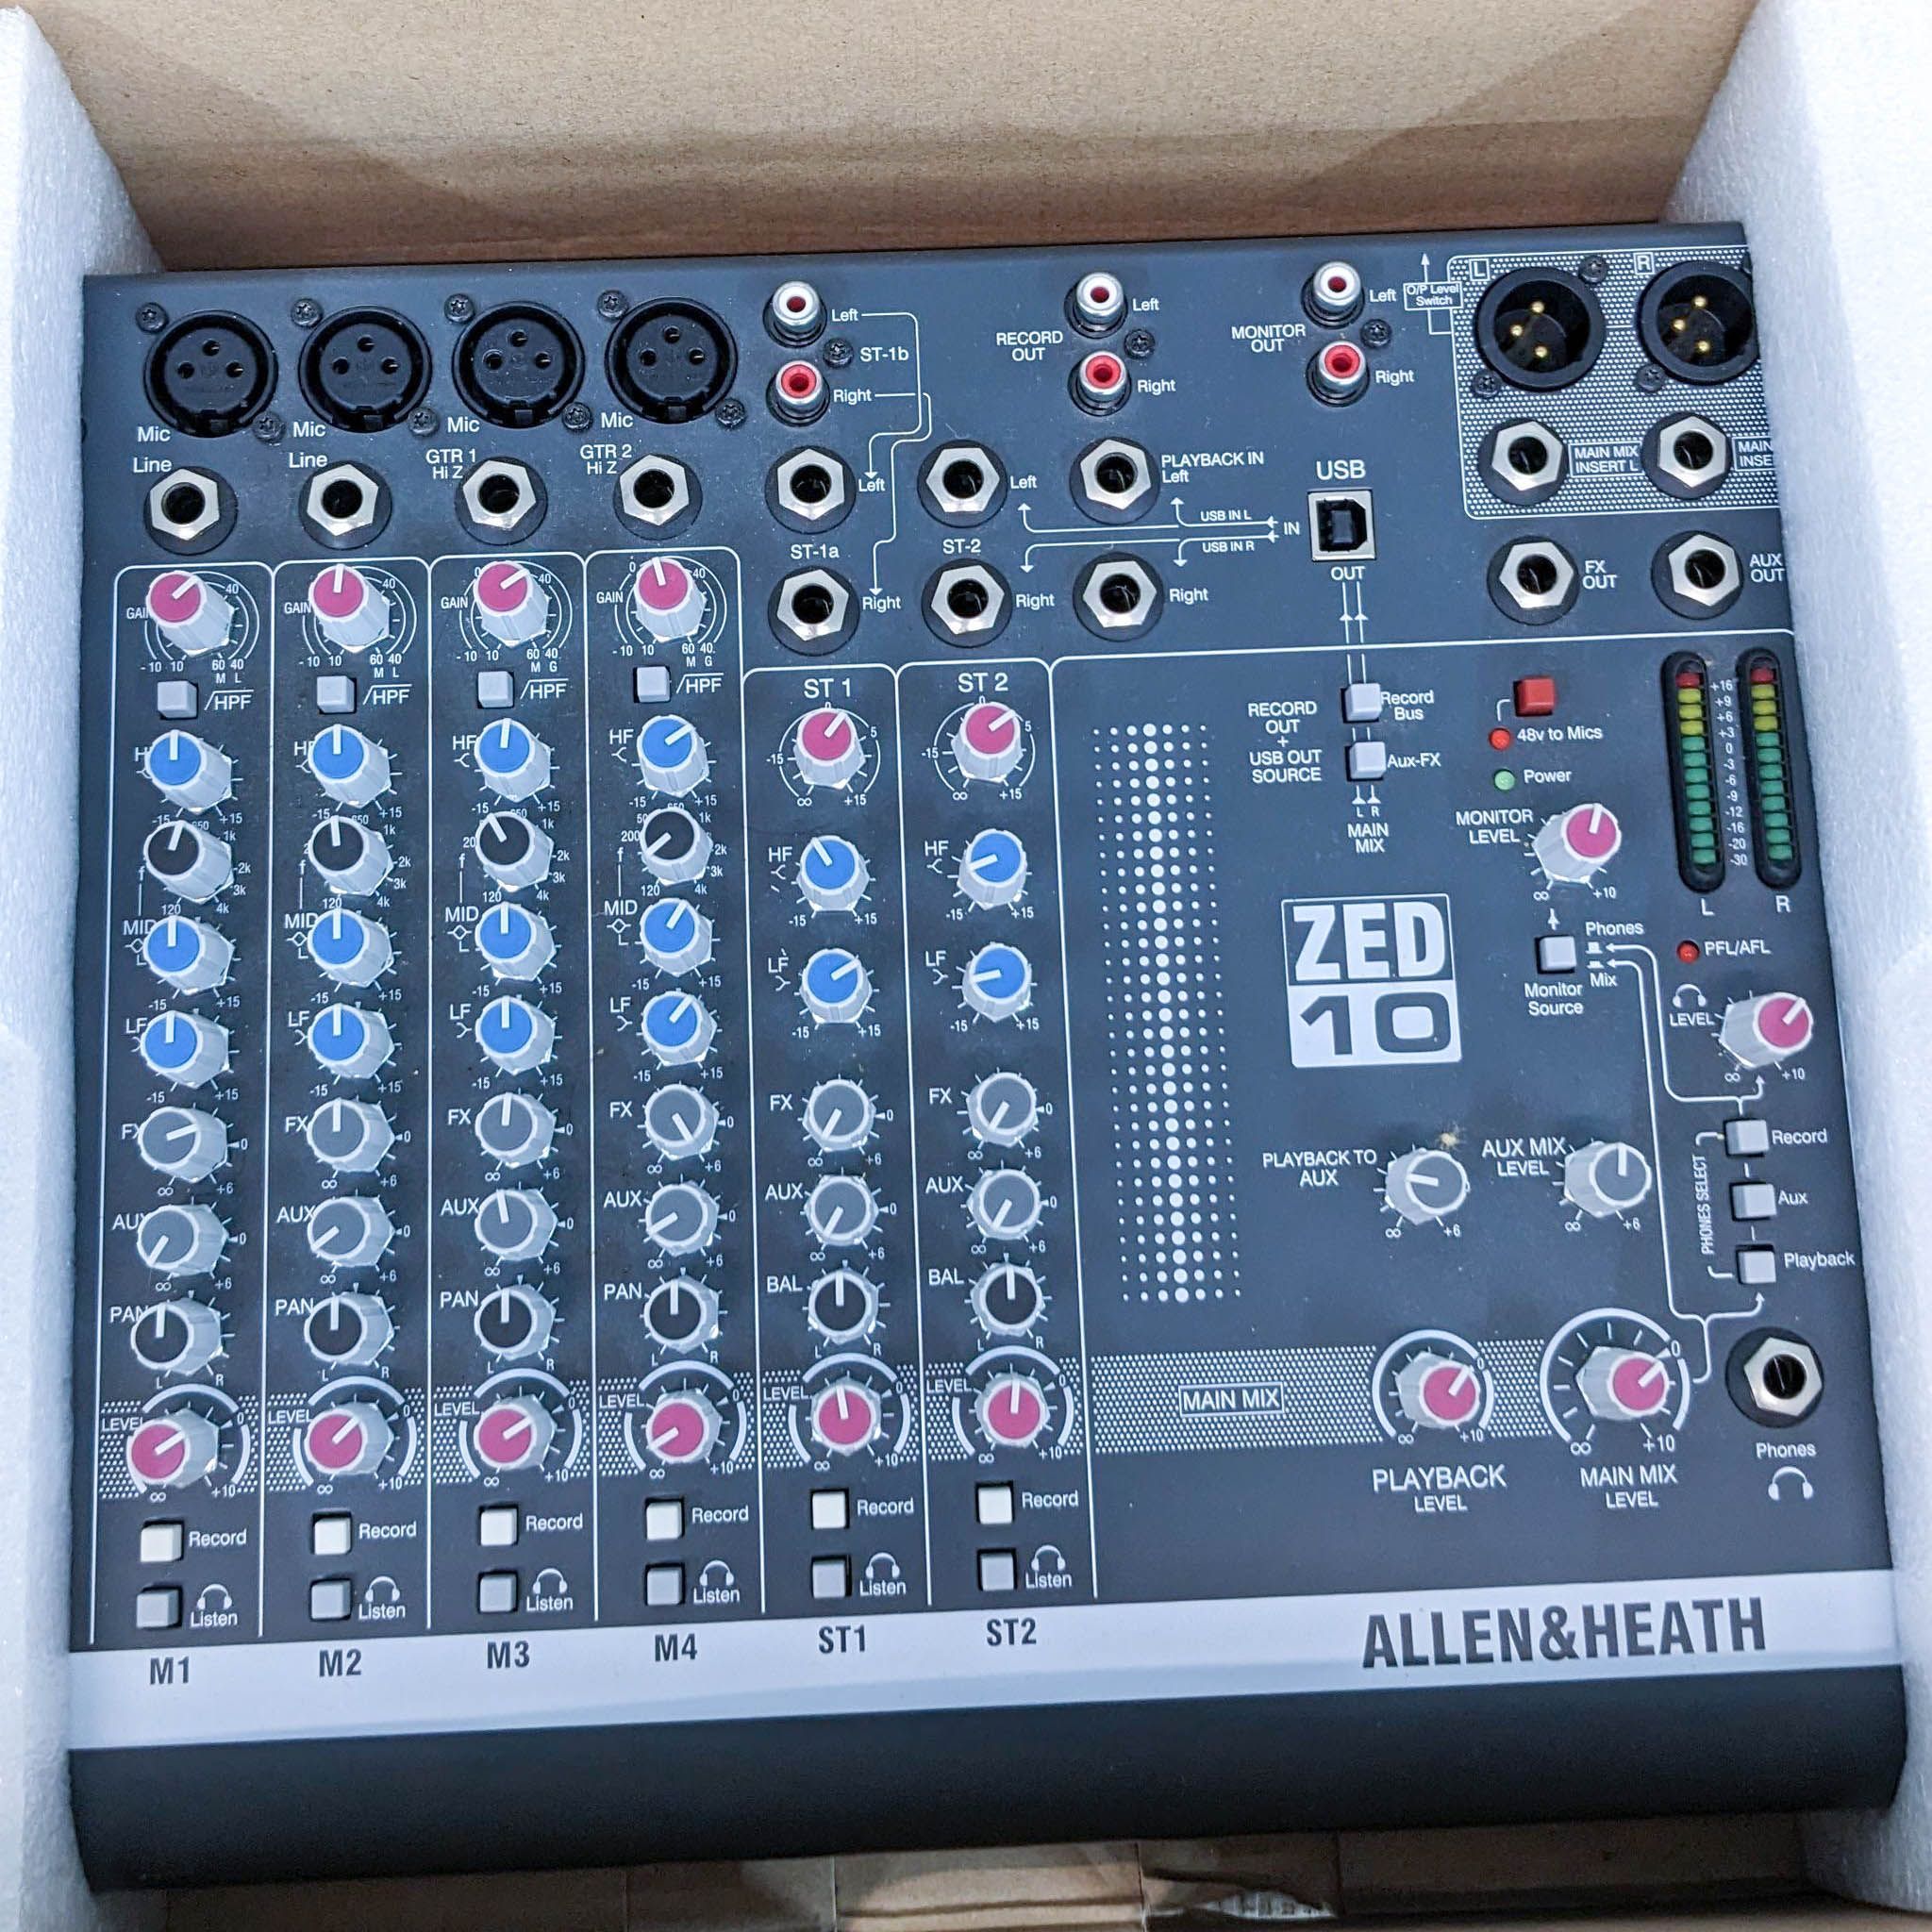 Allen & Heath ZED-10 mixer with USB, packed in styrofoam, view of control surface with knobs and connections.